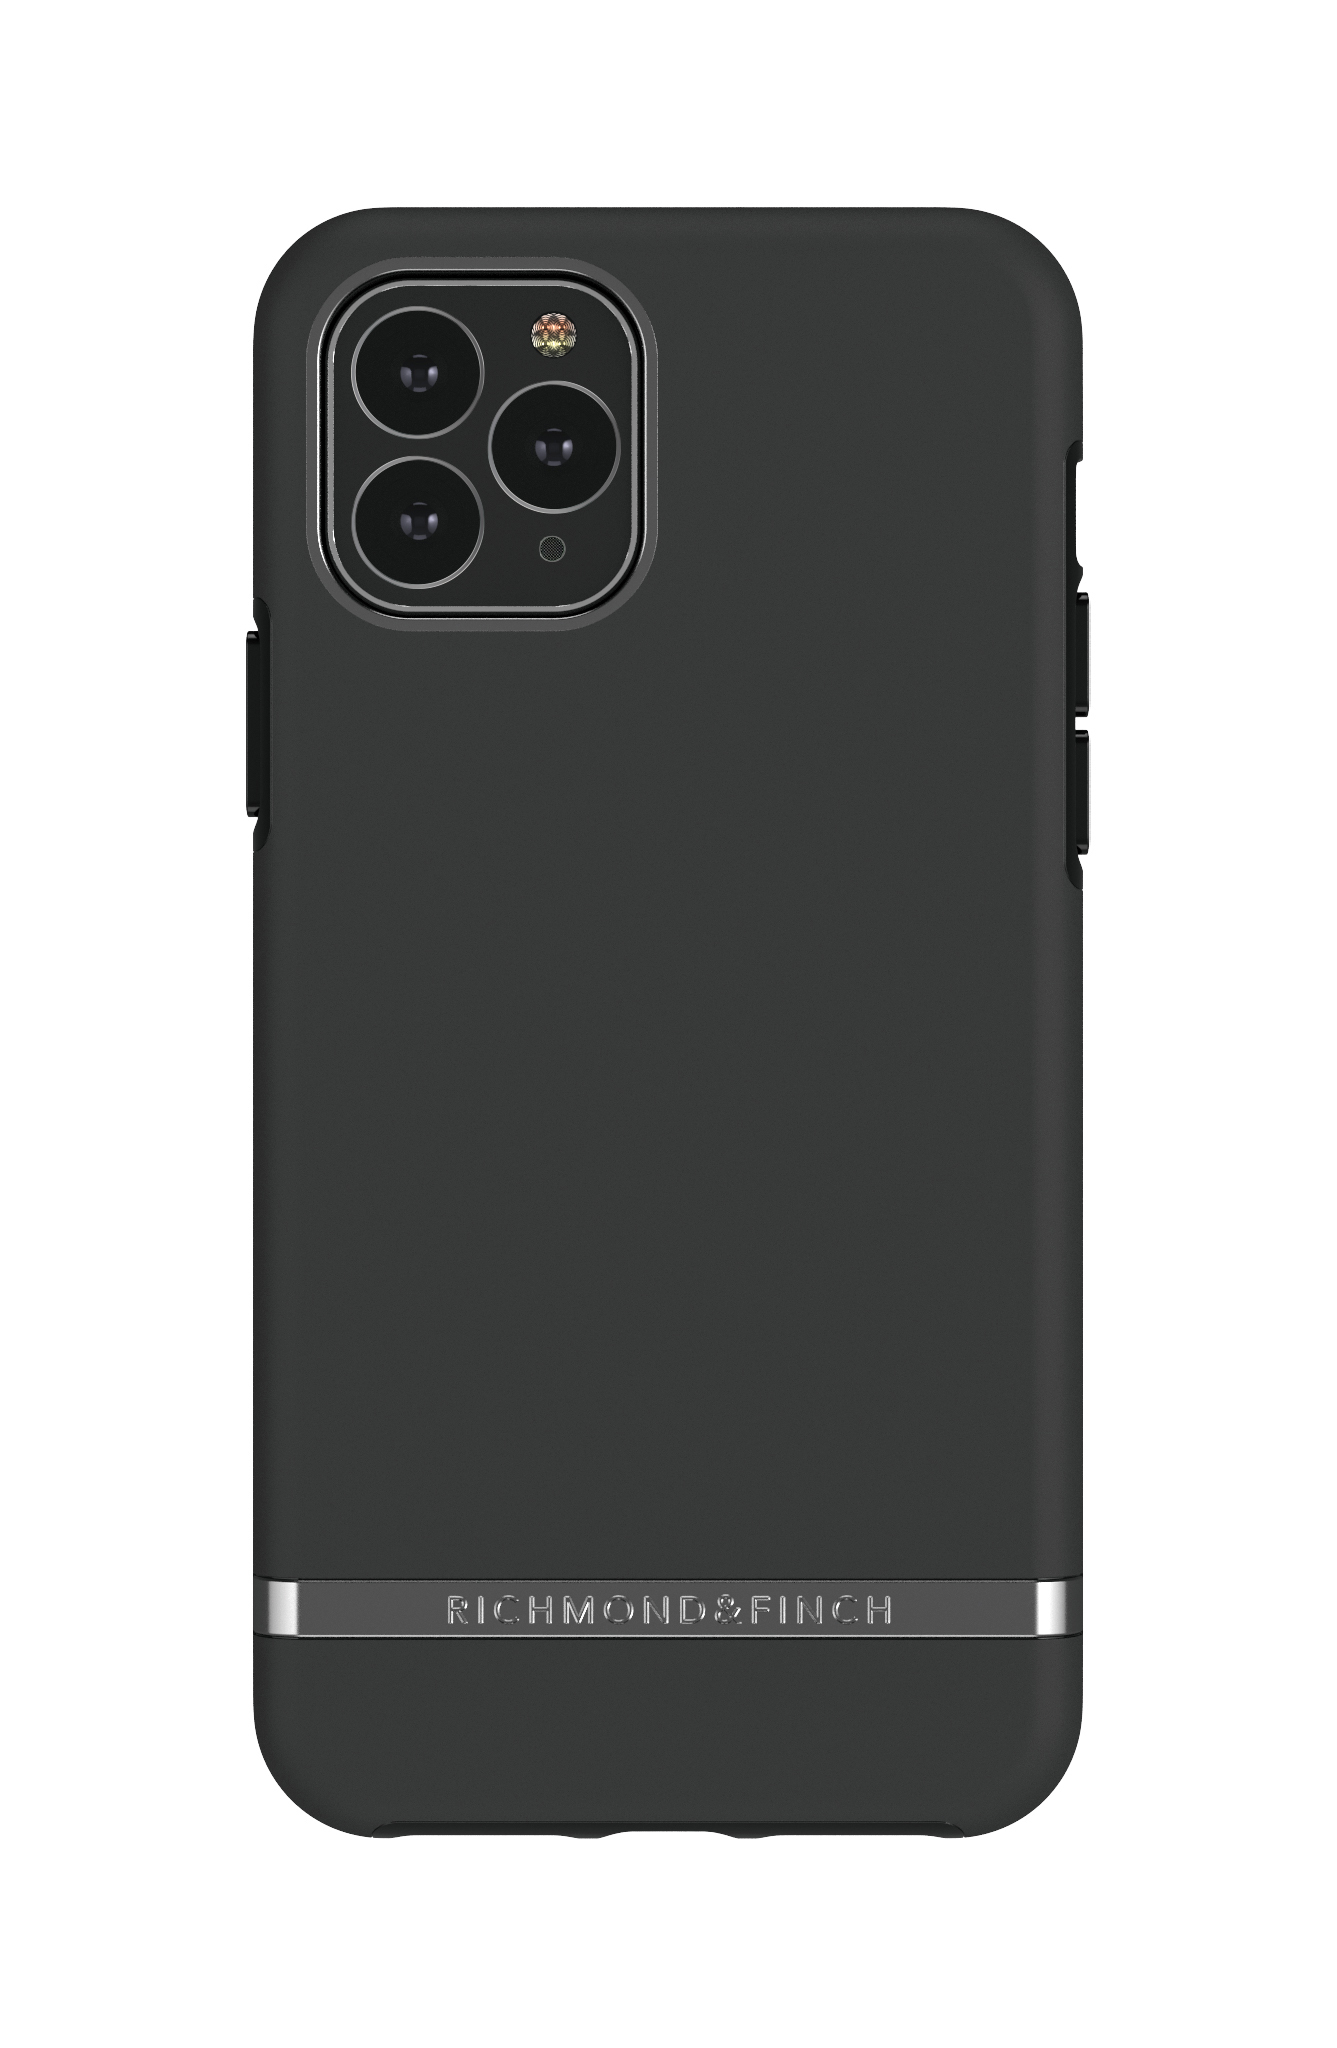 & Out IPHONE 11 Backcover, Black APPLE, RICHMOND PRO, 11 iPhone BLACK FINCH Pro,